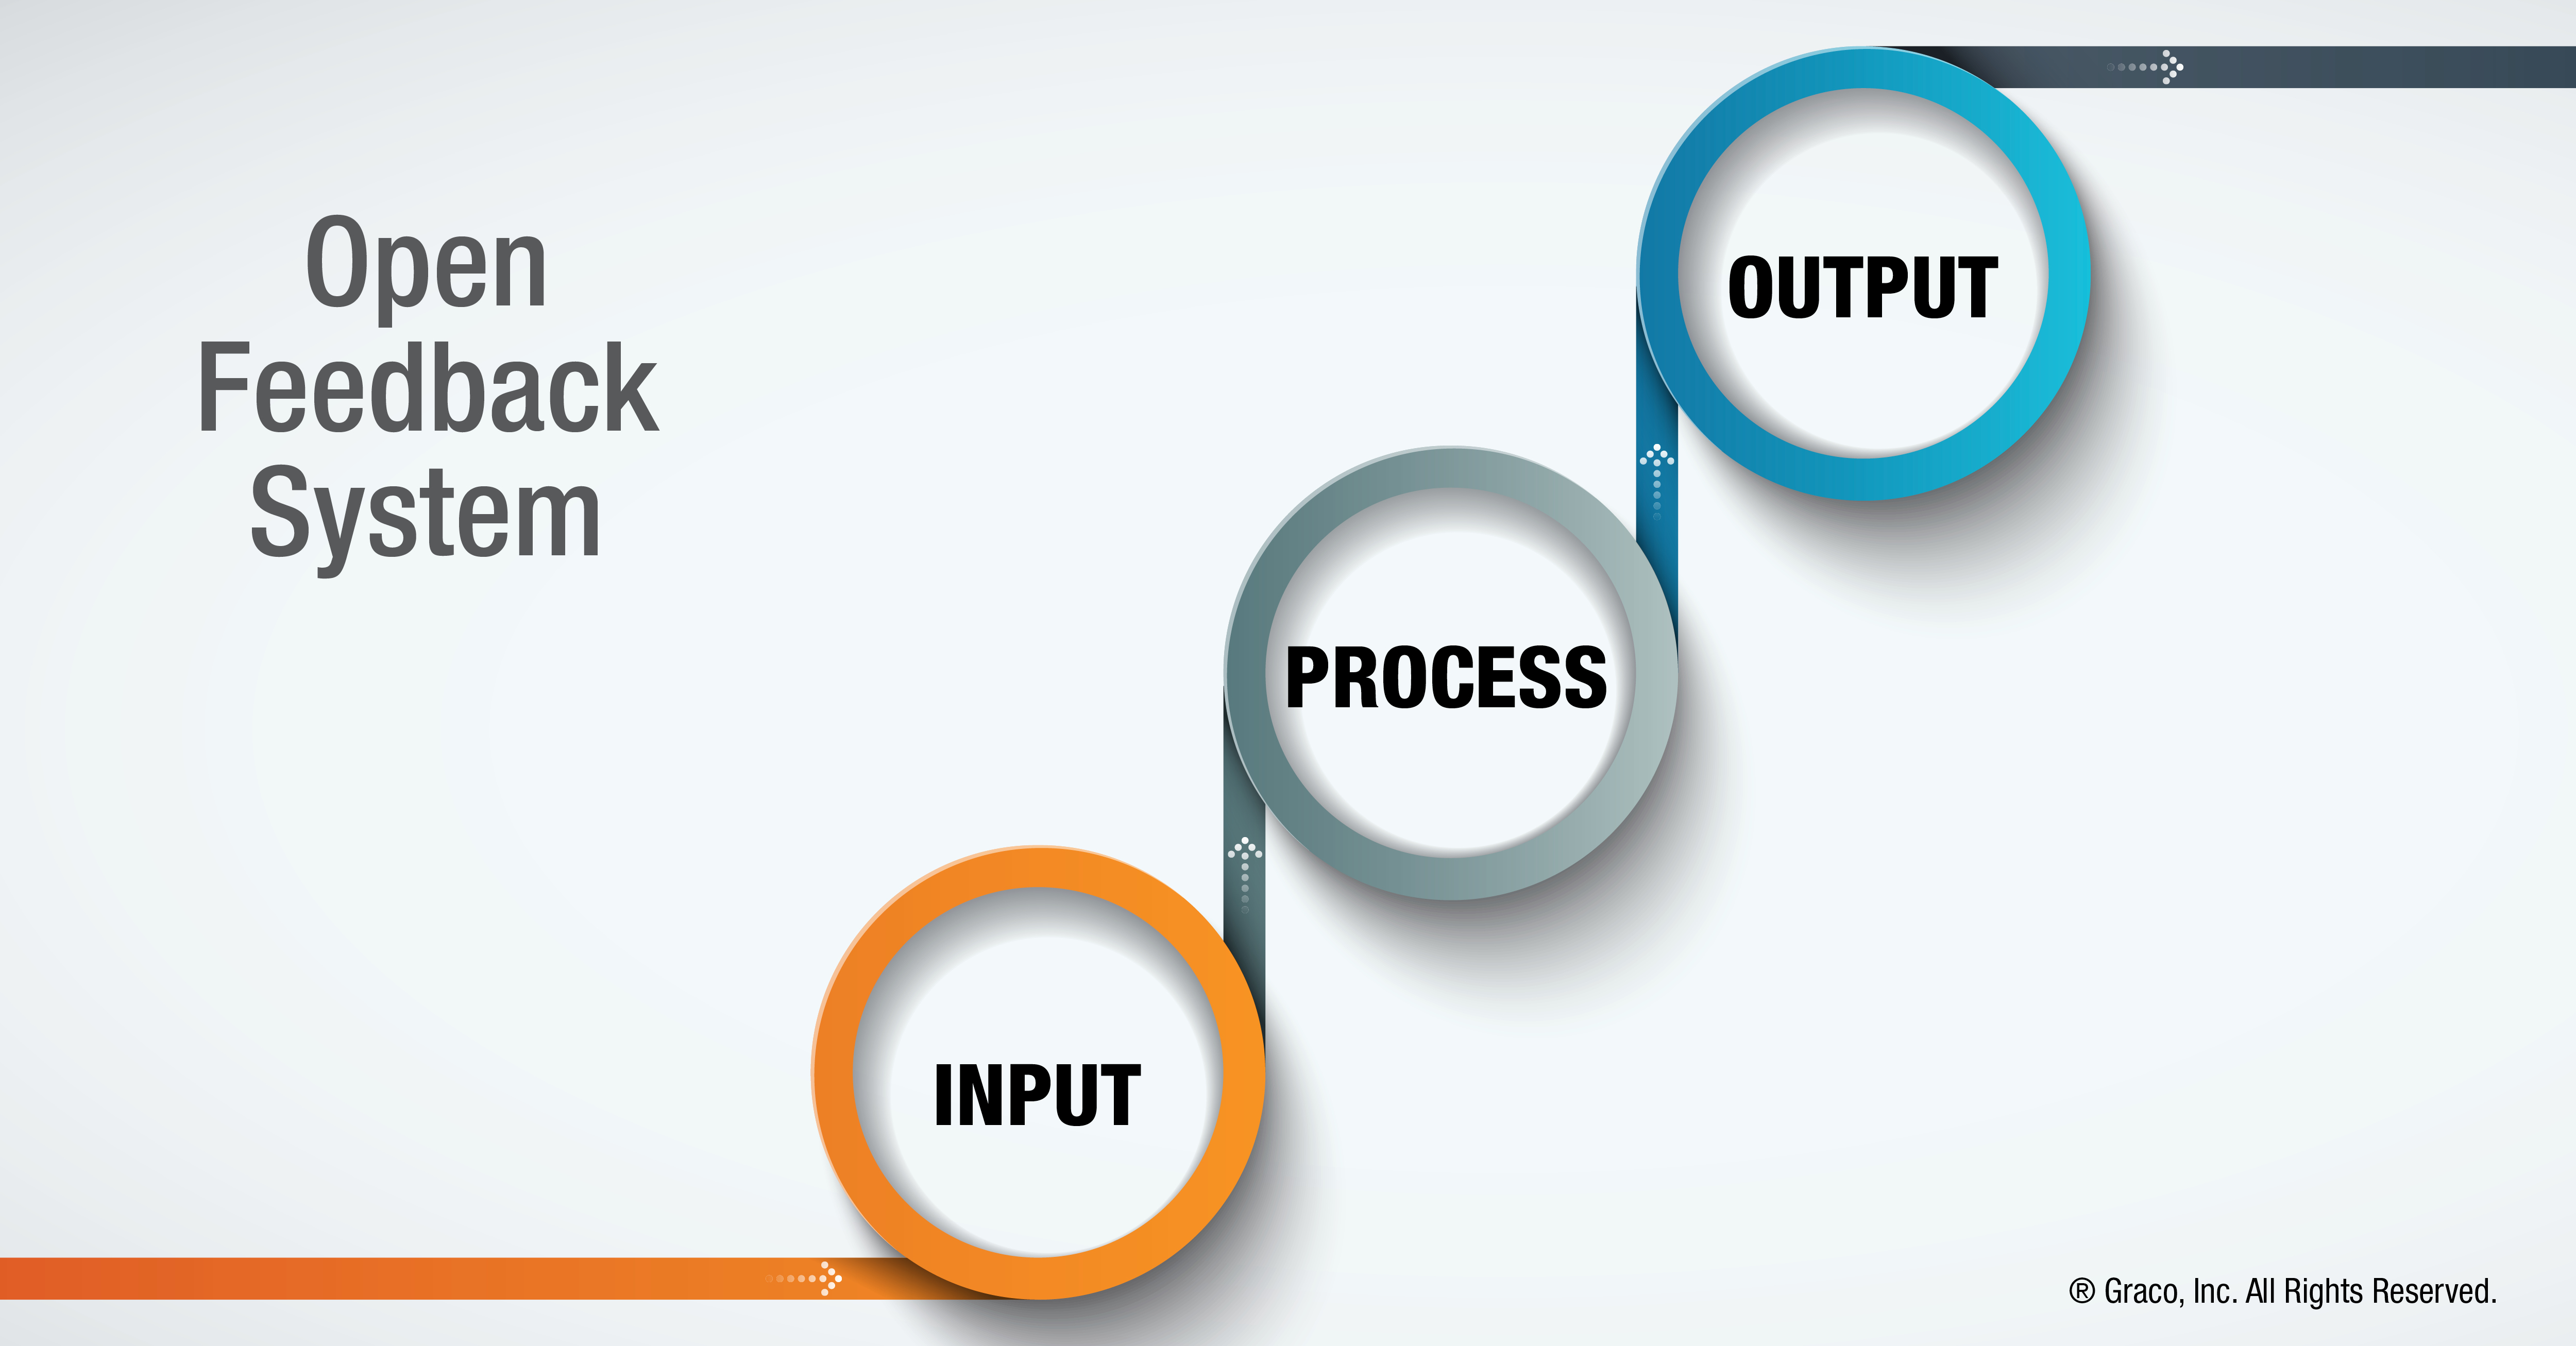 Open feedback system diagram shows input to process to output.